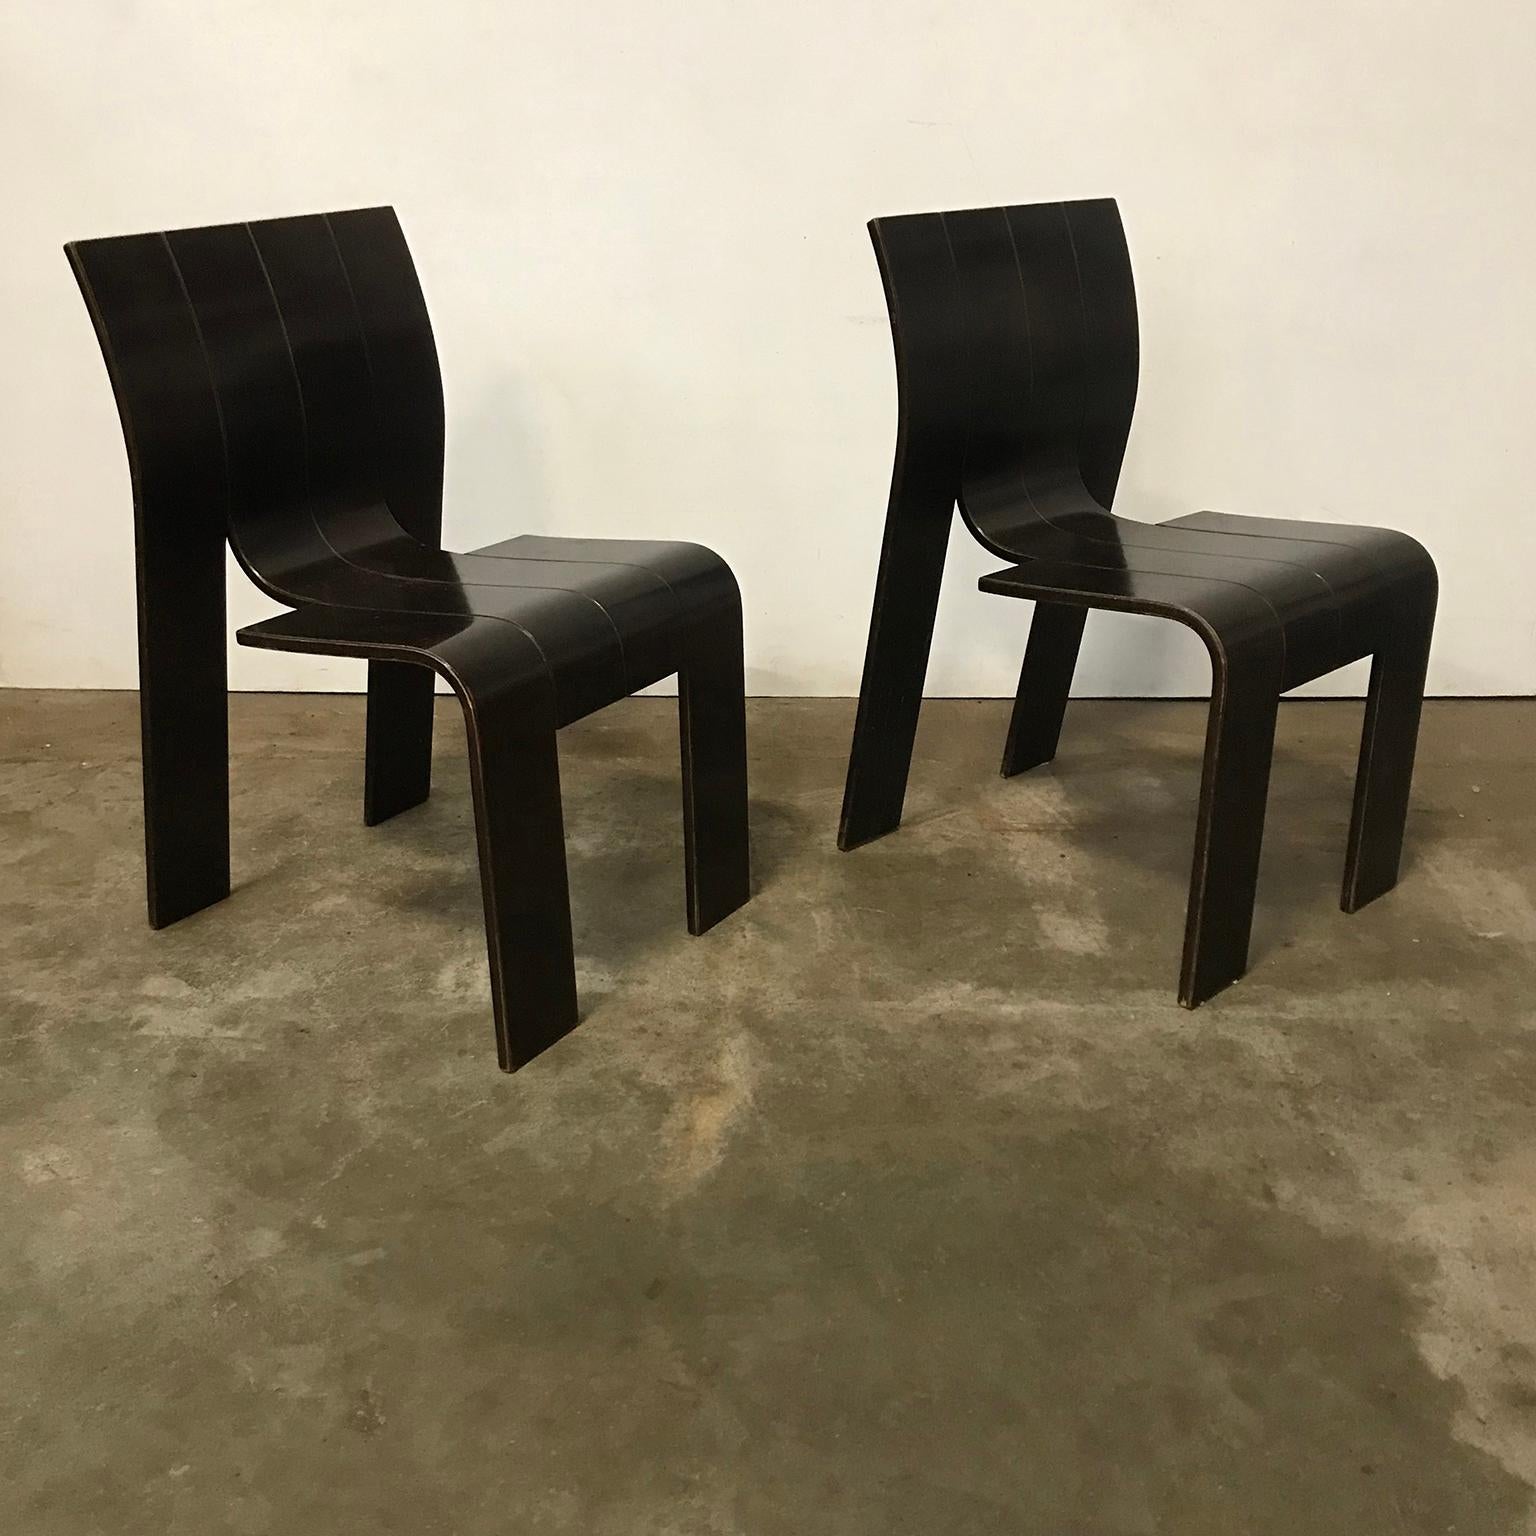 Two dark brown varnished stackable bended wood strip chairs. The chairs are beautiful and interesting because of the design. The condition is good although the chairs show some traces of wear like some loss of paint at the edges and some scratches